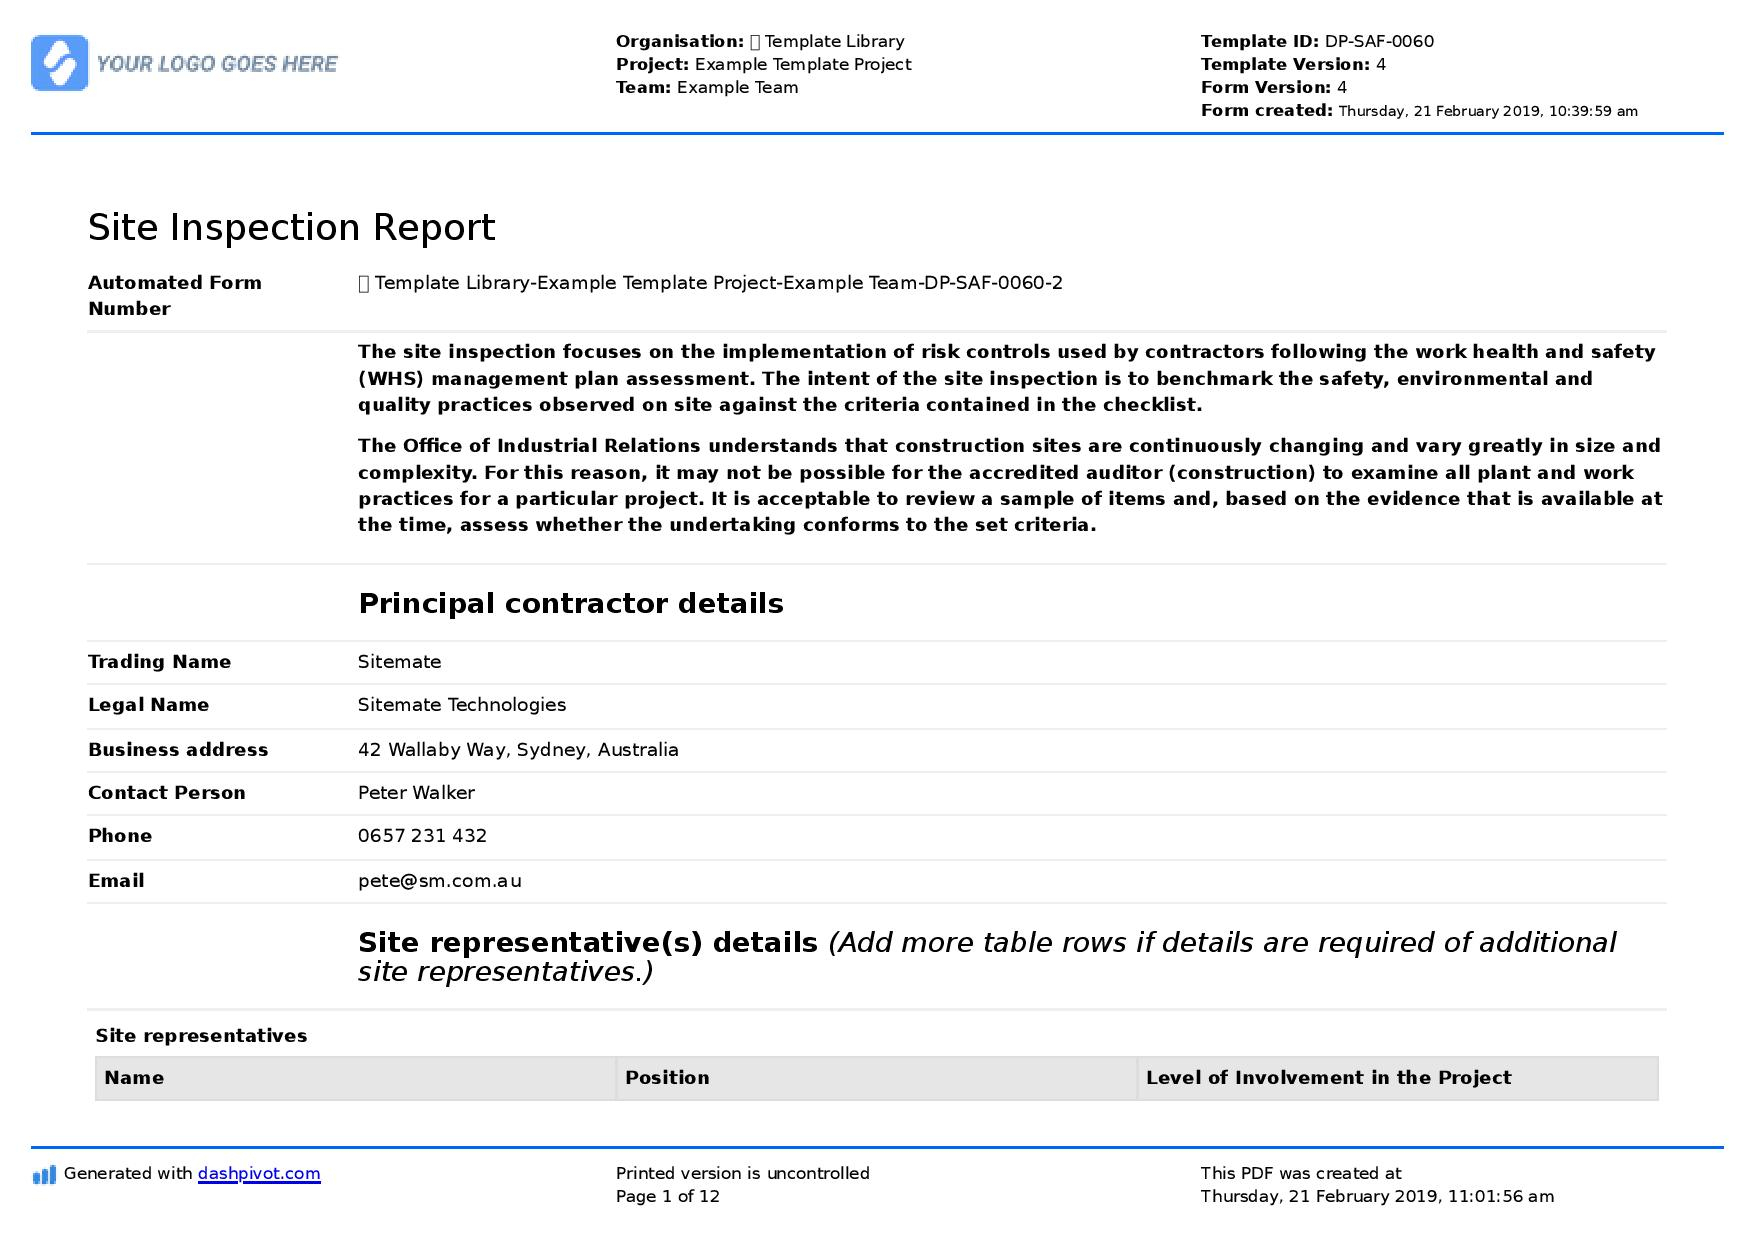 Site Inspection Report: Free Template, Sample And A Proven With Engineering Inspection Report Template